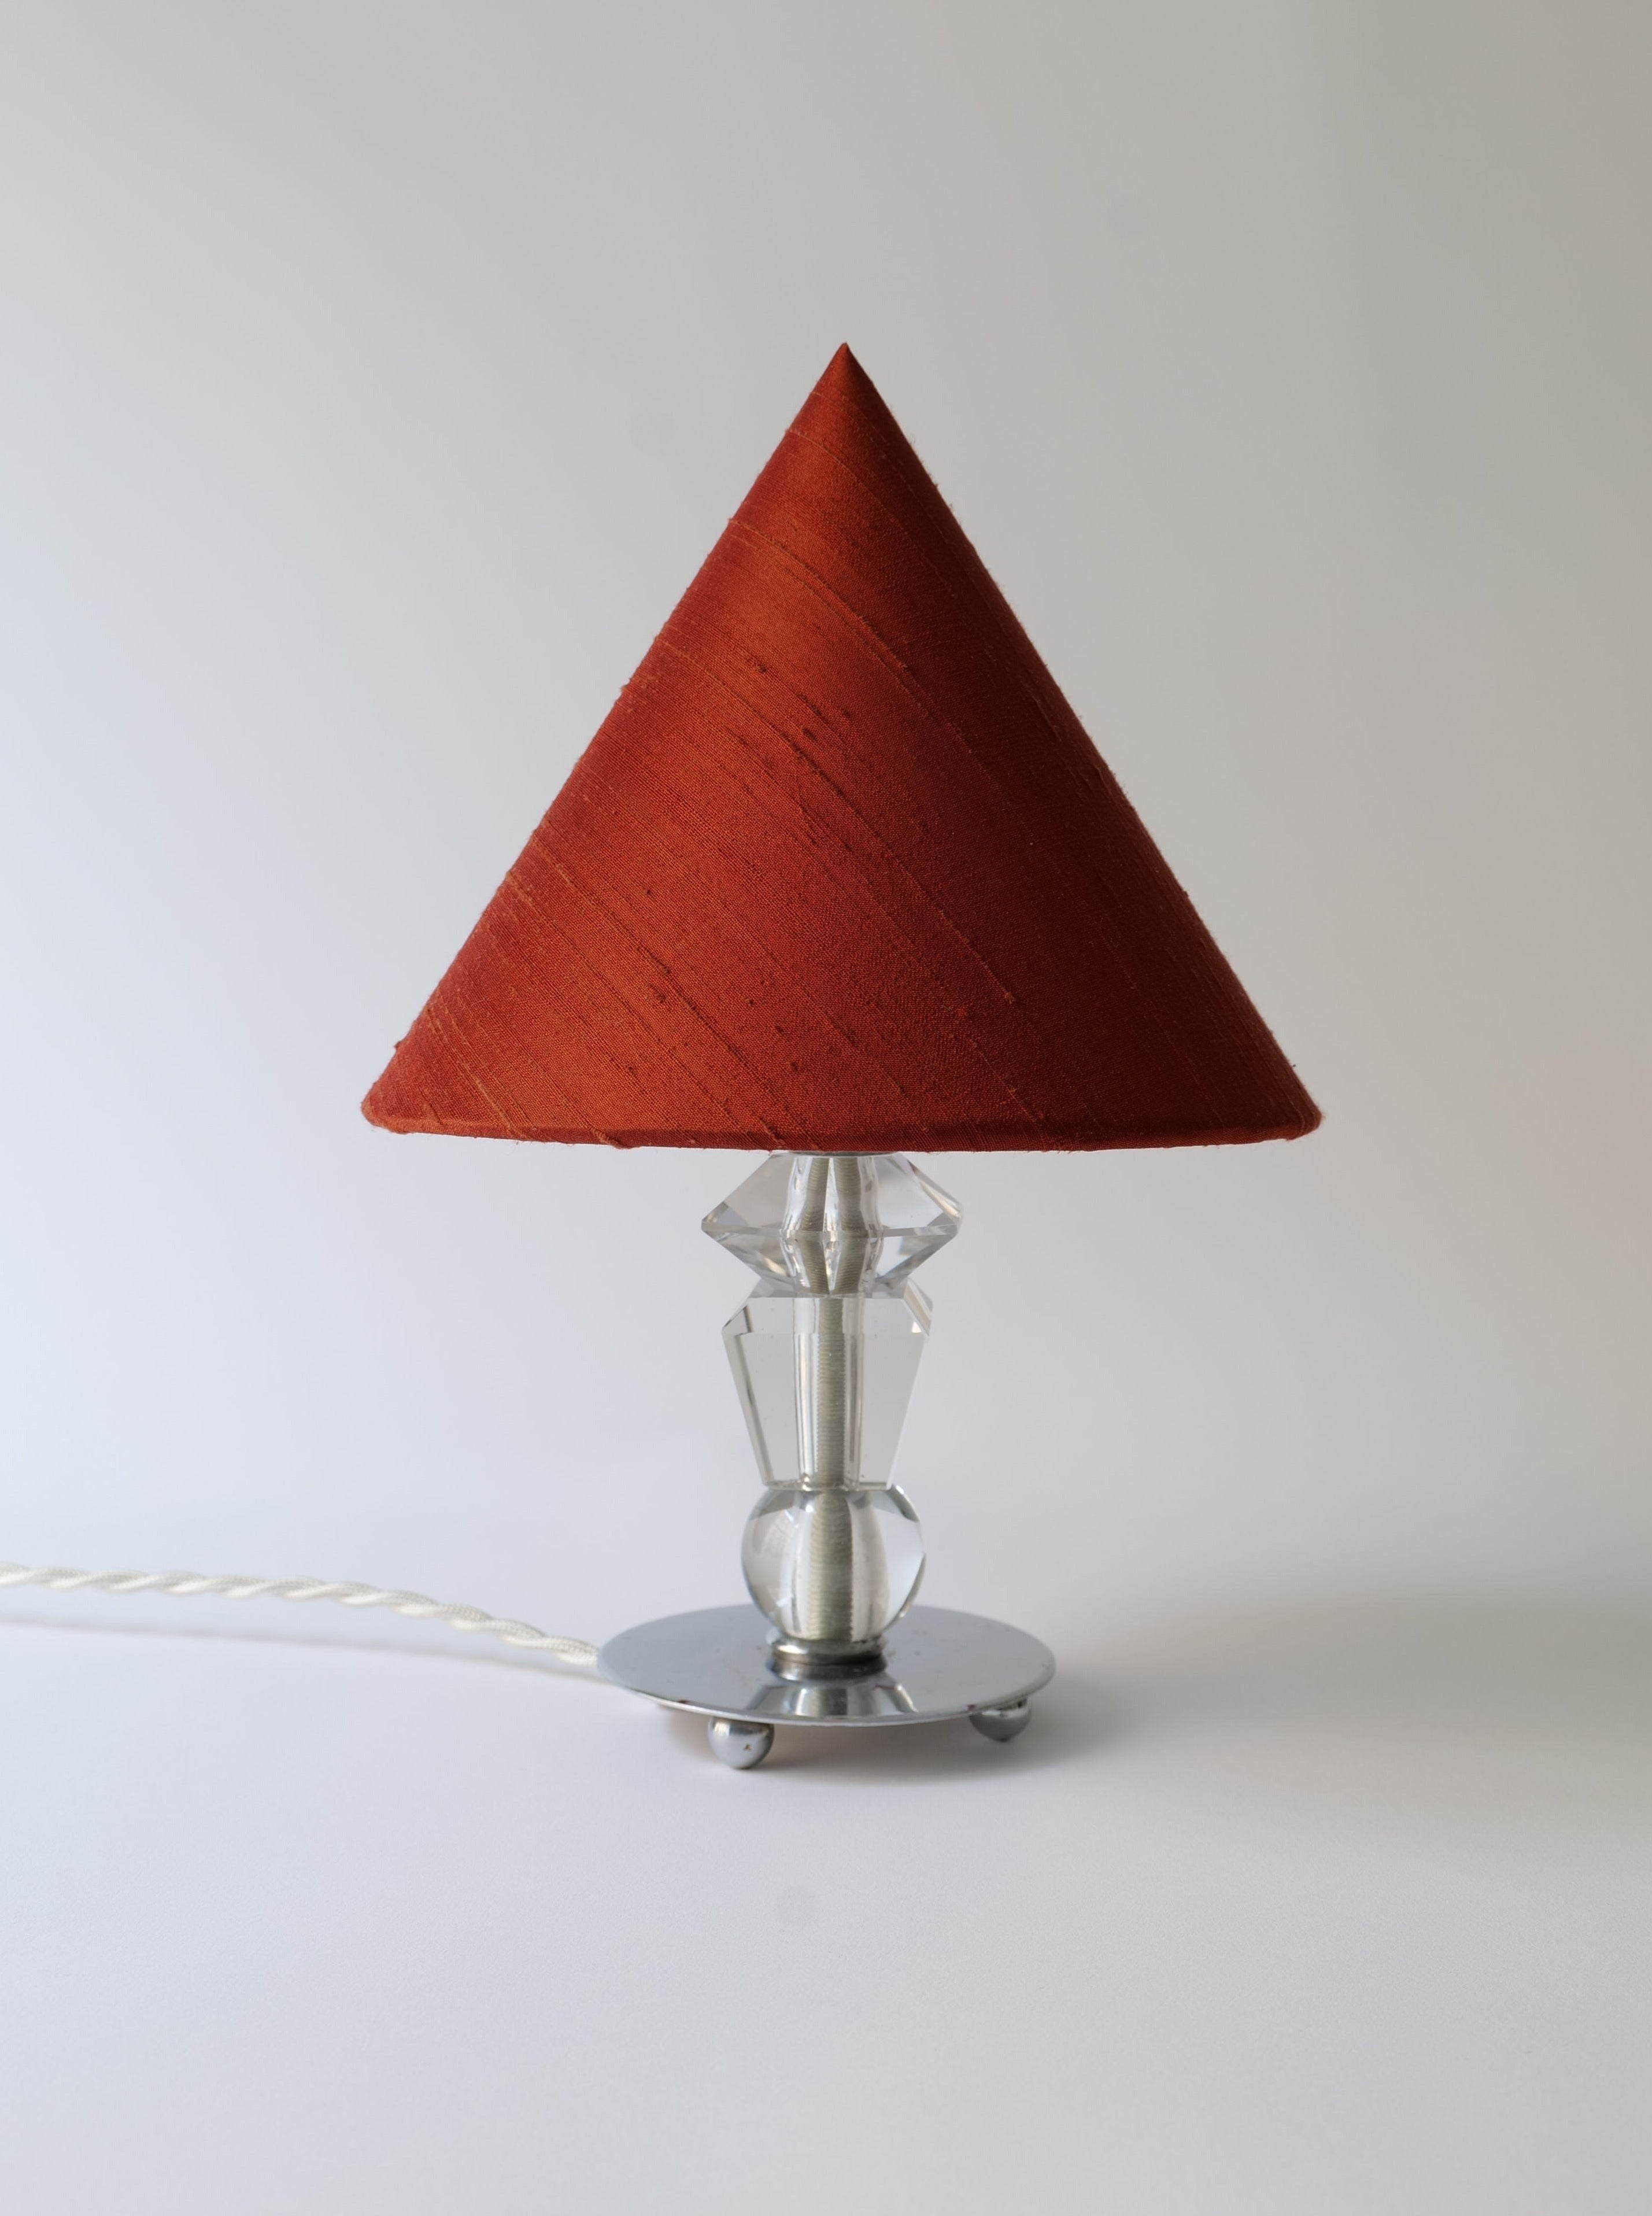 A modern Deco Crystal Table Lamp from Collection Apart with a vivid red conical shade and a sleek, chrome geometric base, set against a plain white background.